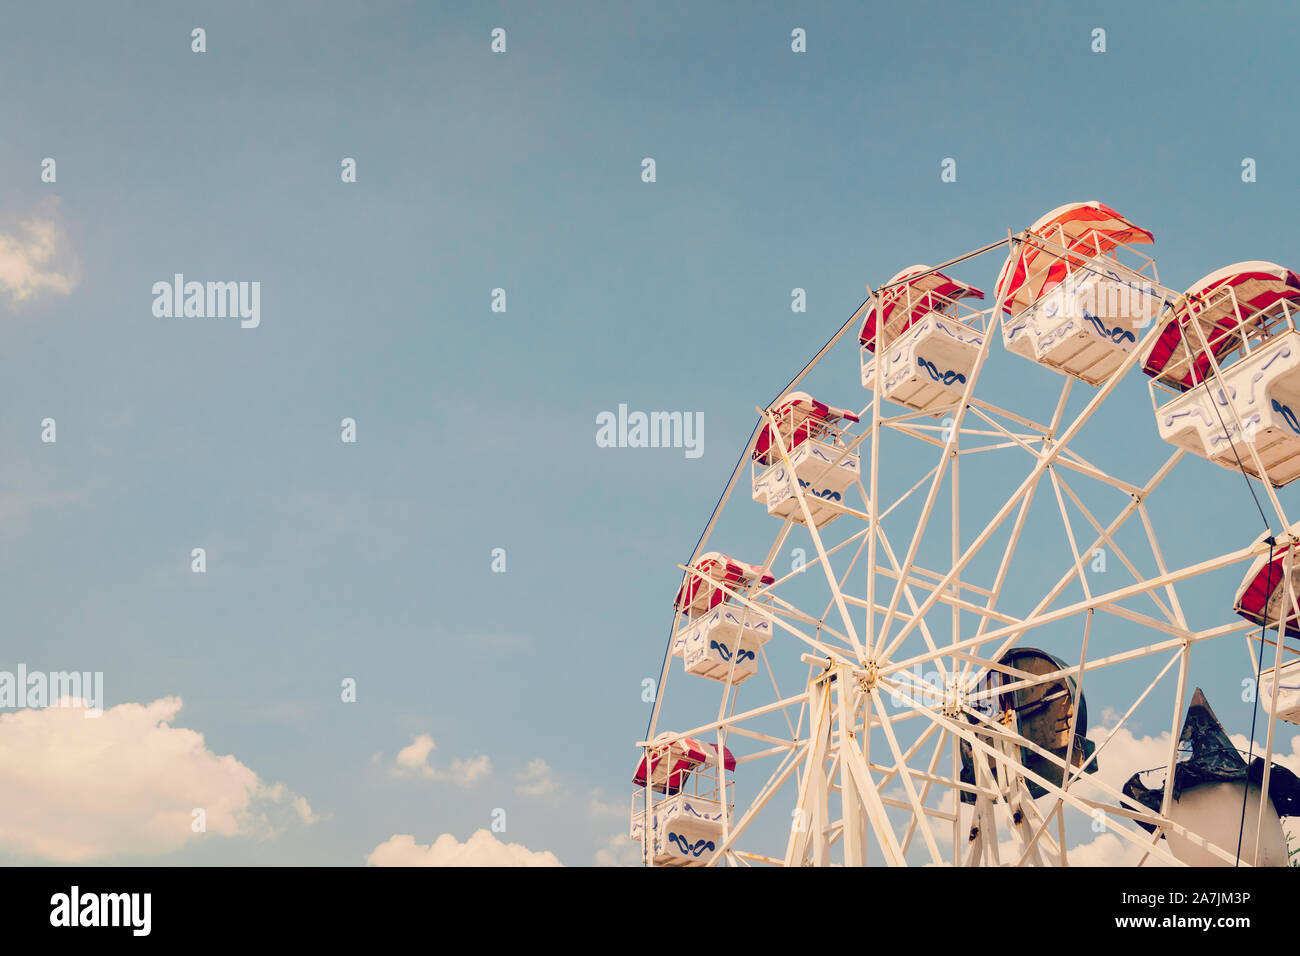 Ferris wheel on cloudy sky background with vintage toned. Stock Photo